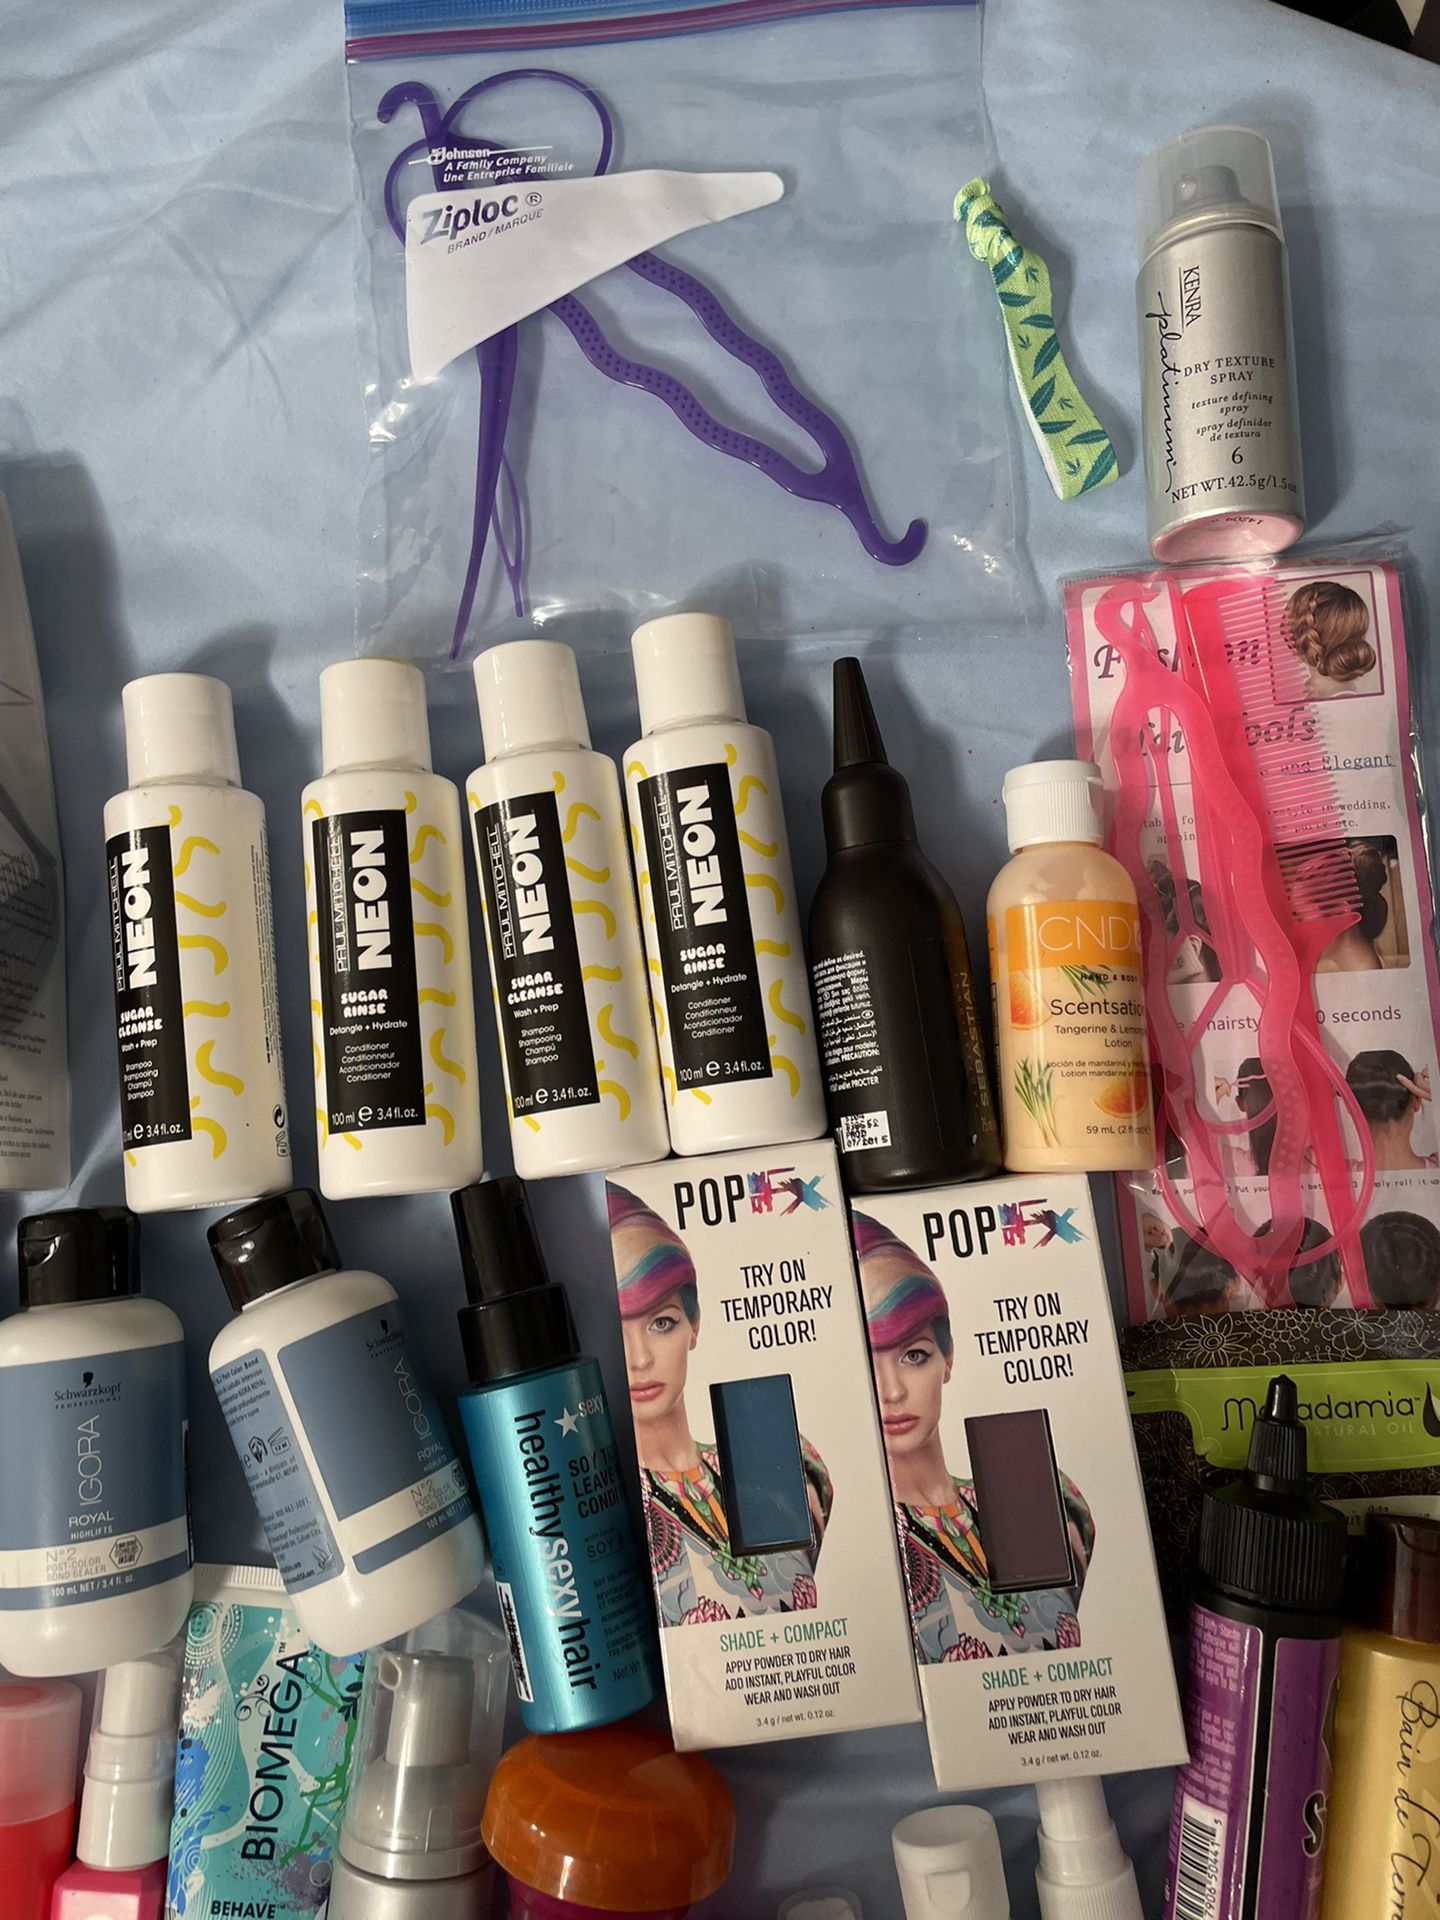 Mystery Package! 3 New/unused Beauty Items For $15